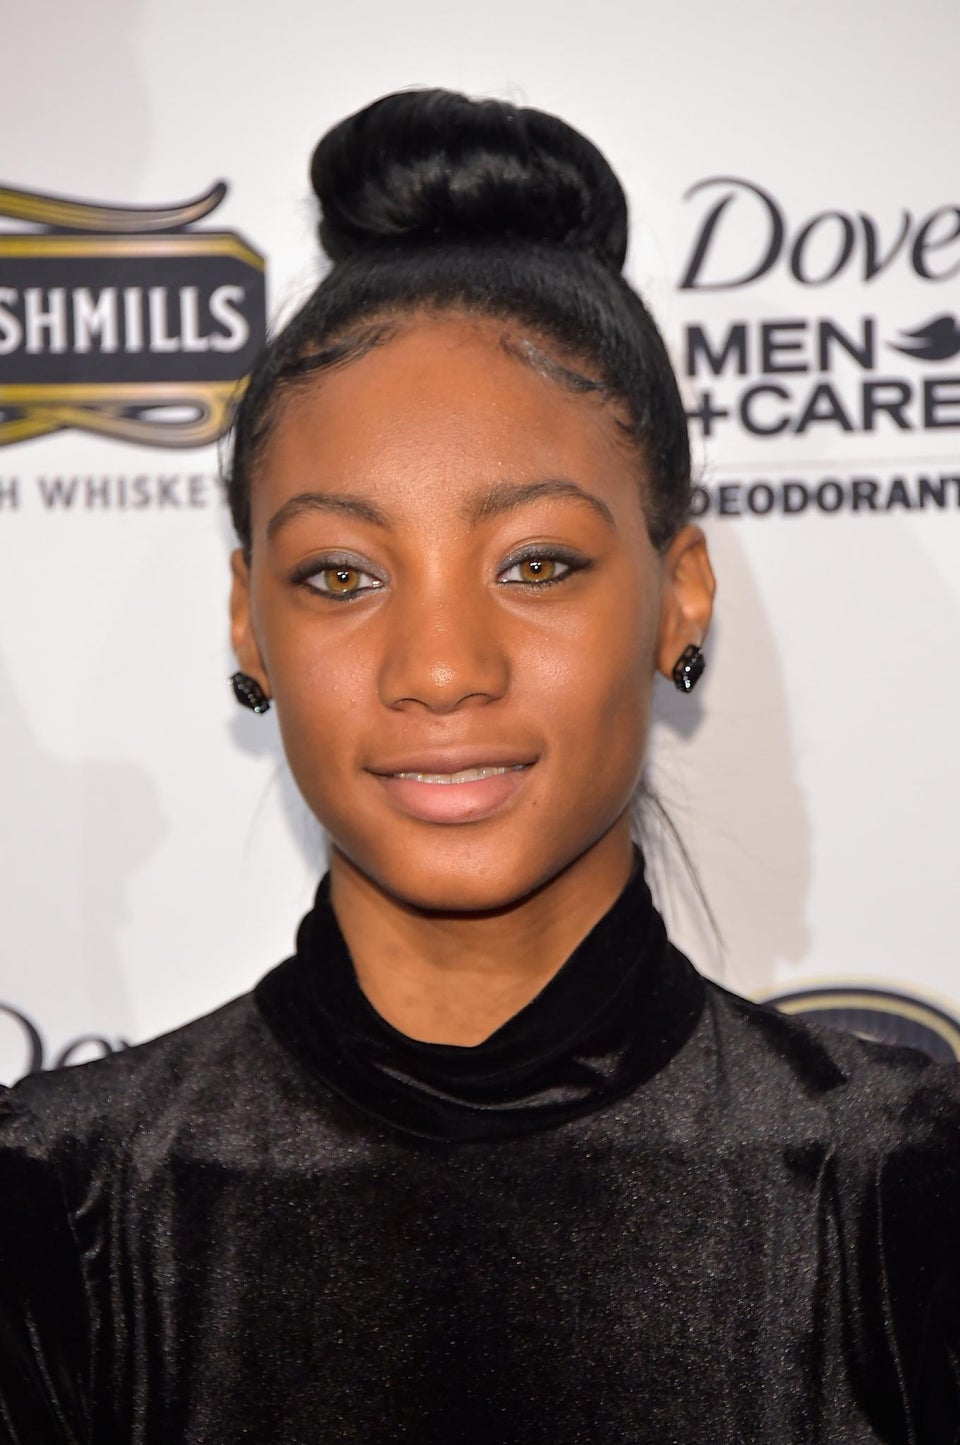 Mo’ne Davis: Being a Girl in Male-Dominated Sports Is “Pretty Crazy”